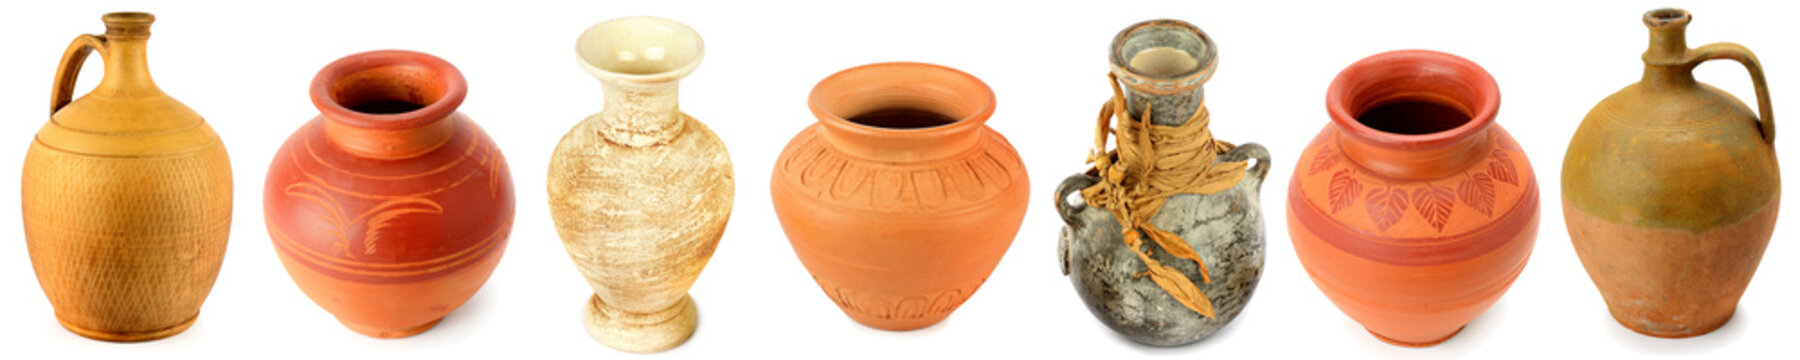 Panoramic collage of ceramic jugs, vase-amphoras isolated on white background.